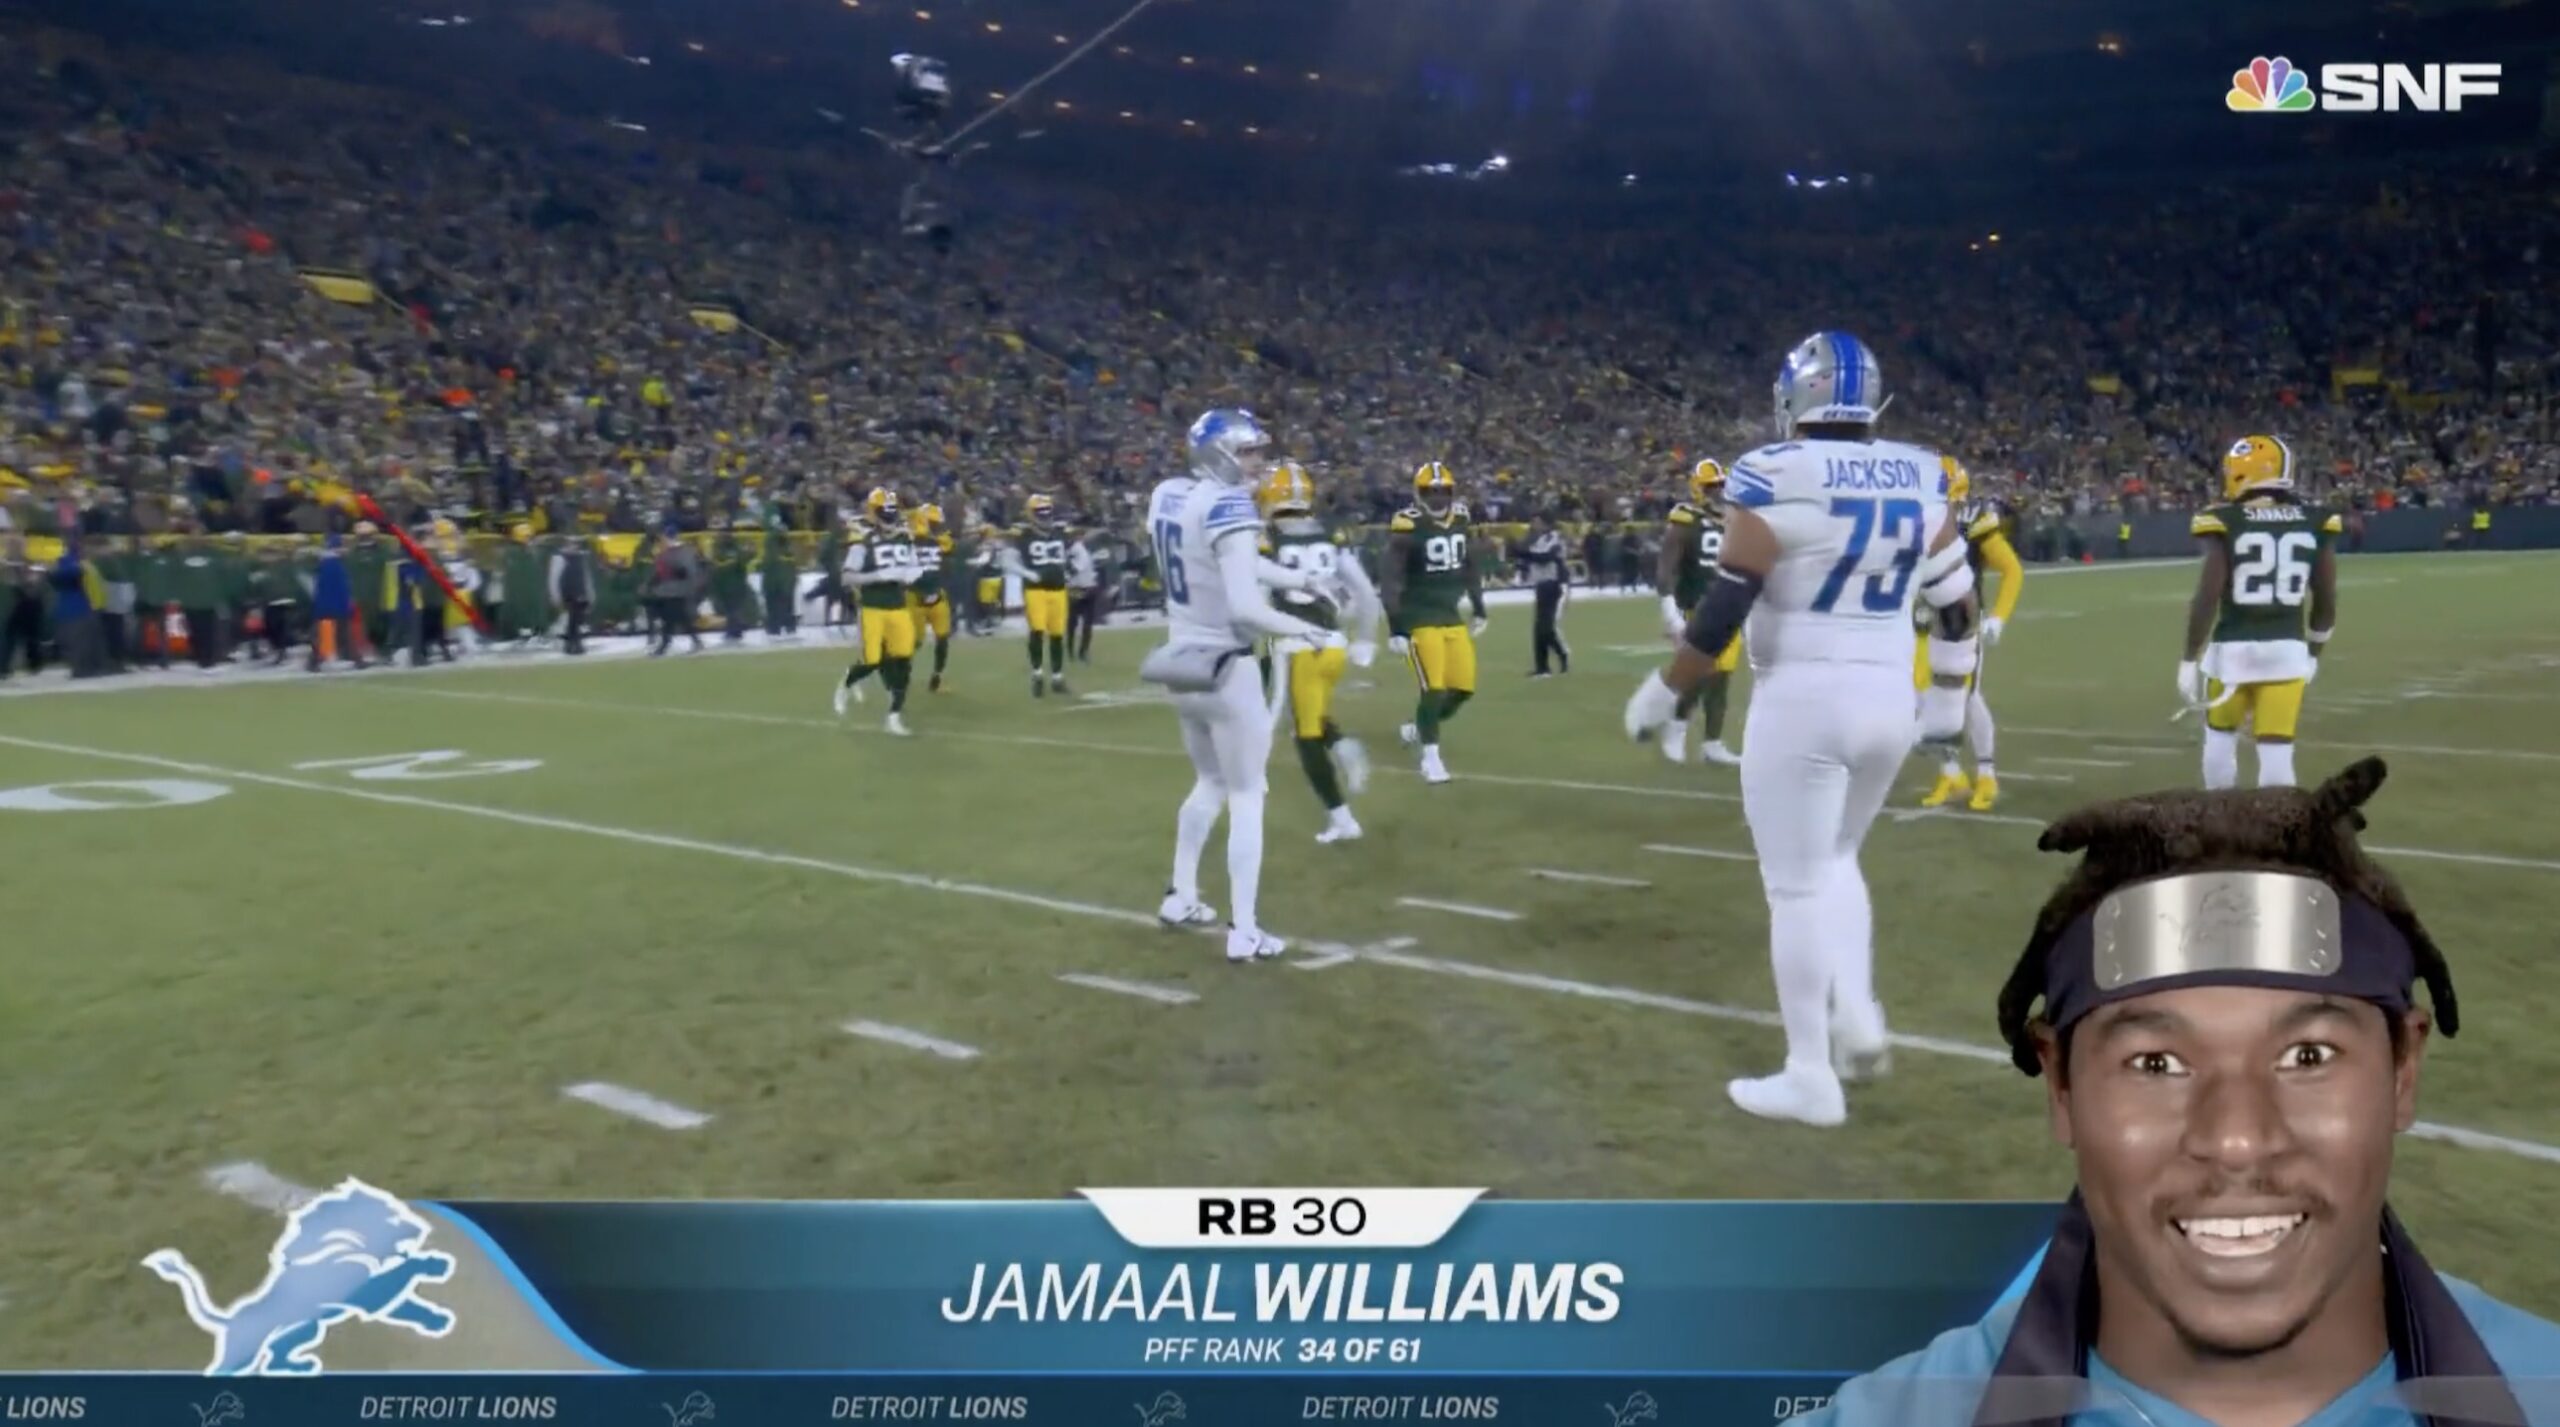 Here Are The Most Hilarious NFL Player Intros from NBC’s Sunday Night